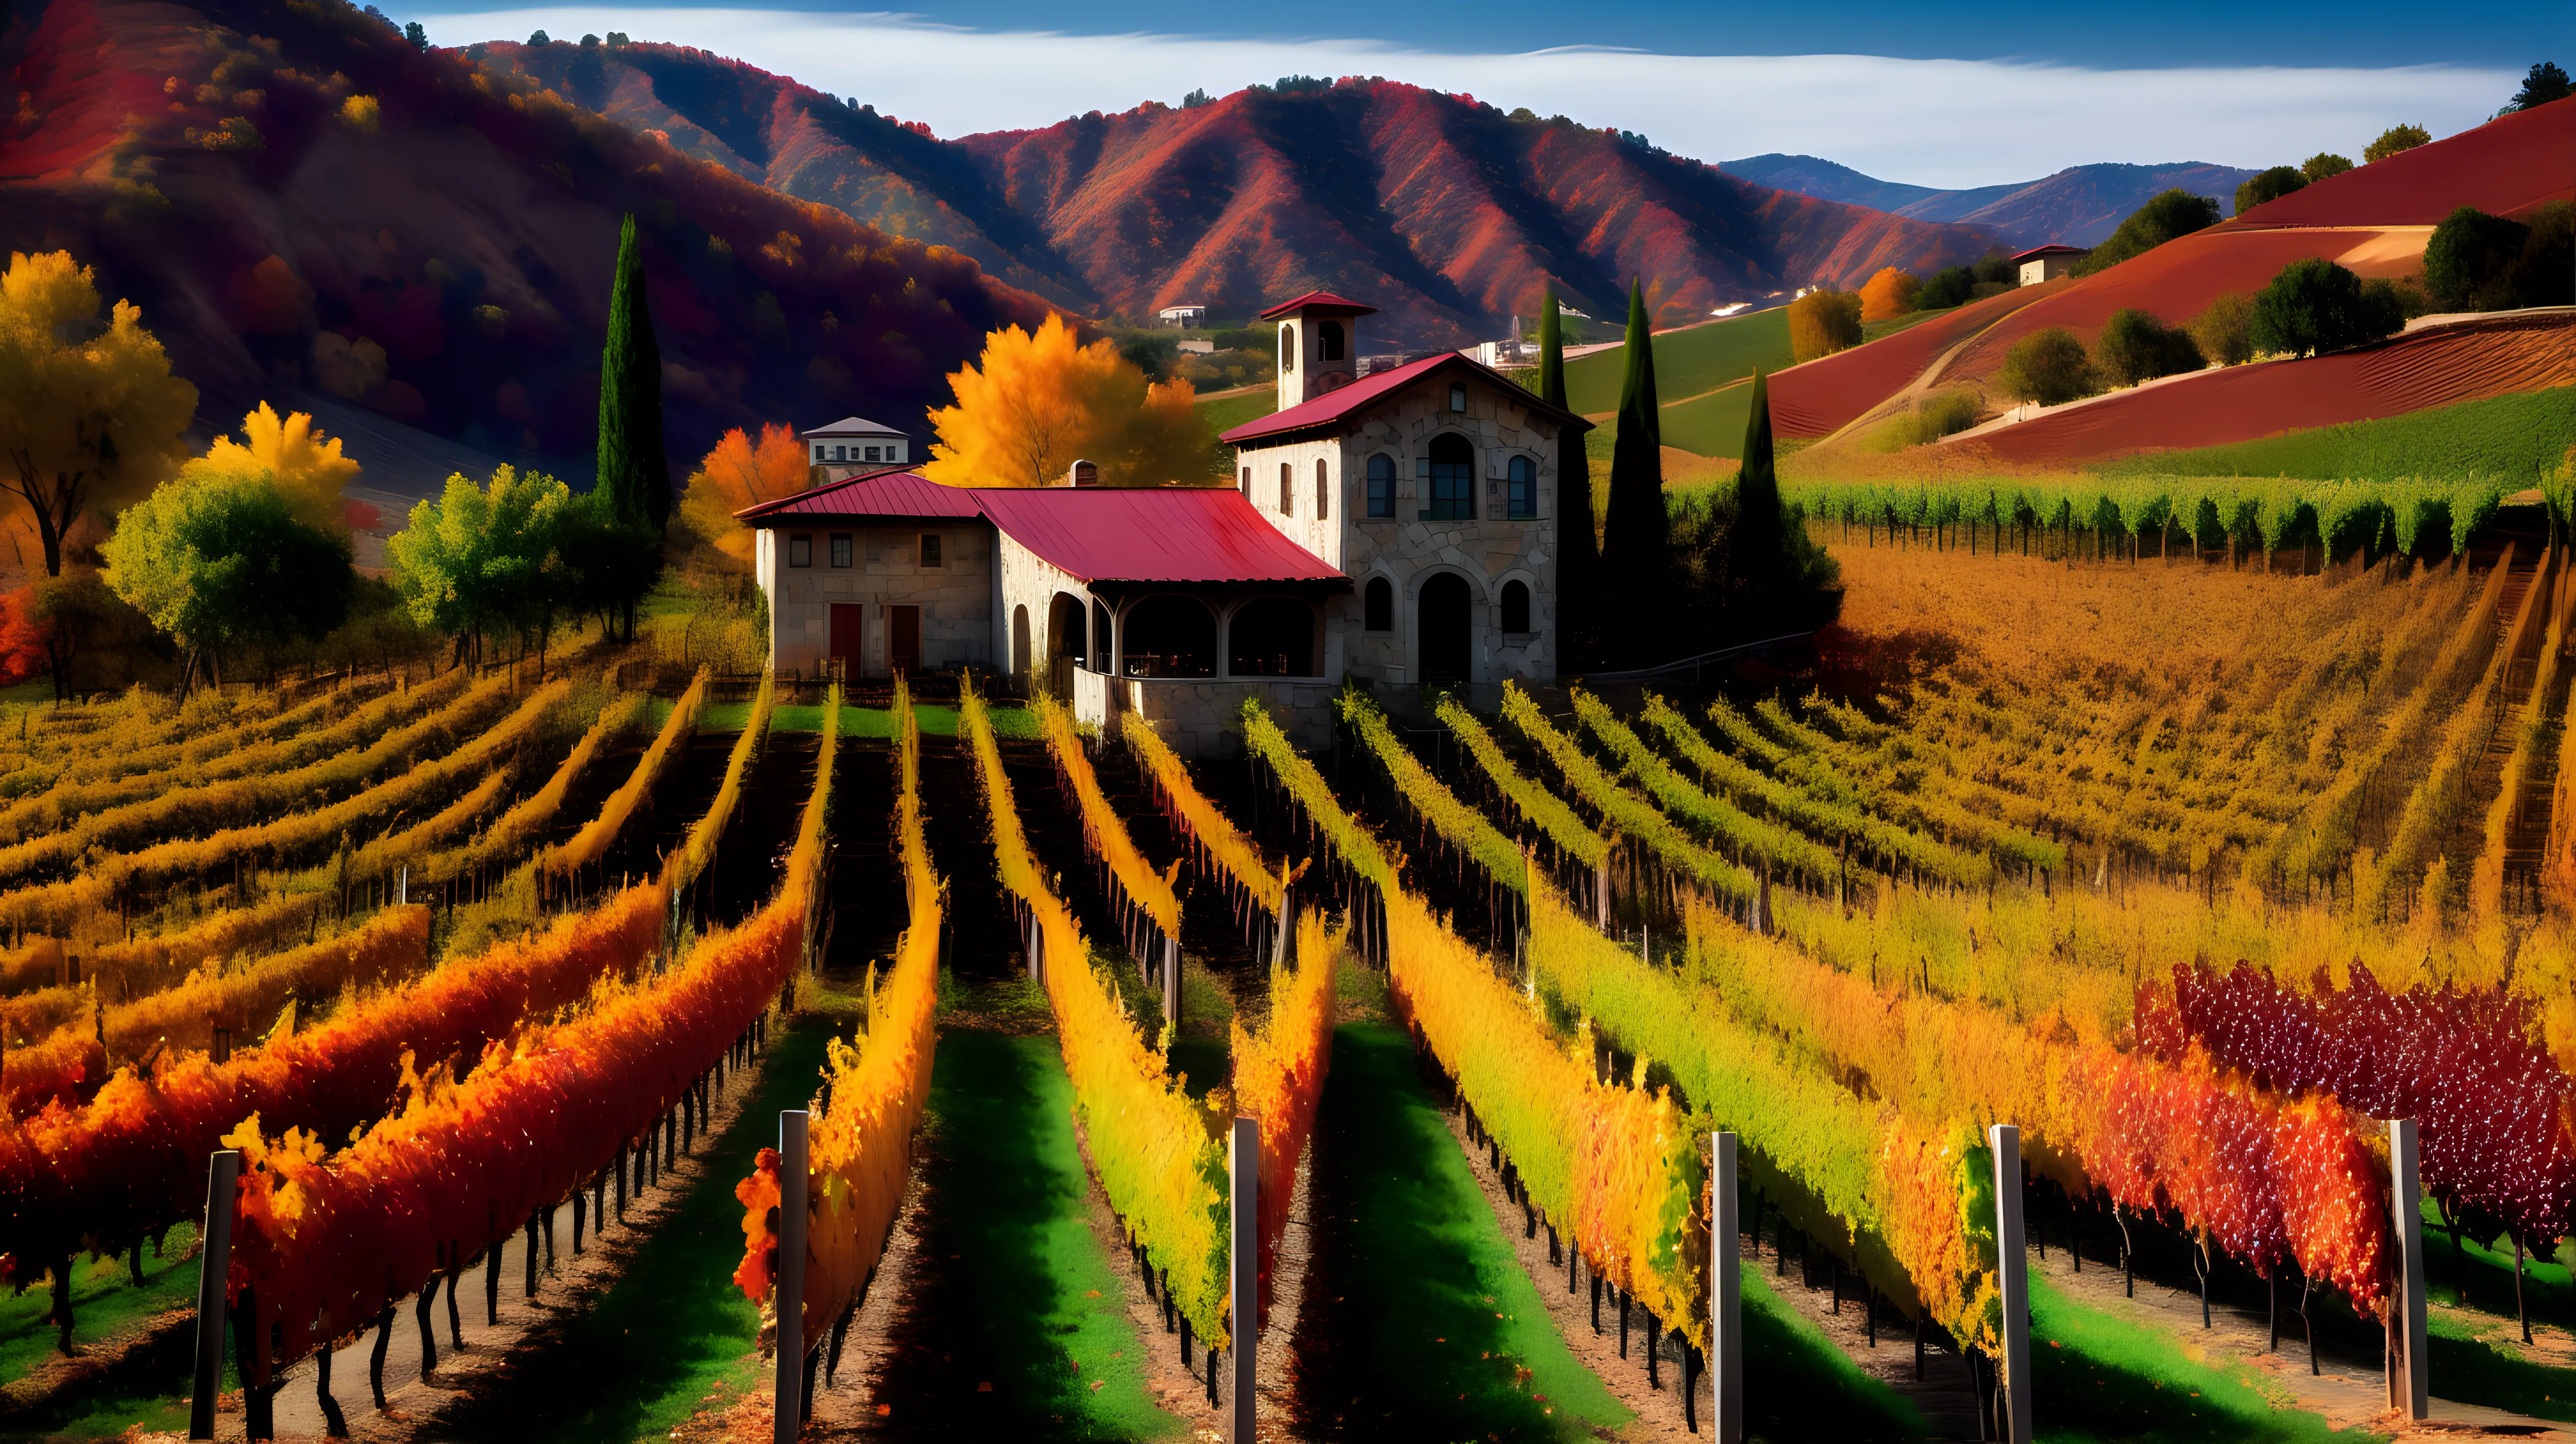 Rustic Winery Surrounded by Vibrant Autumn Grapevines